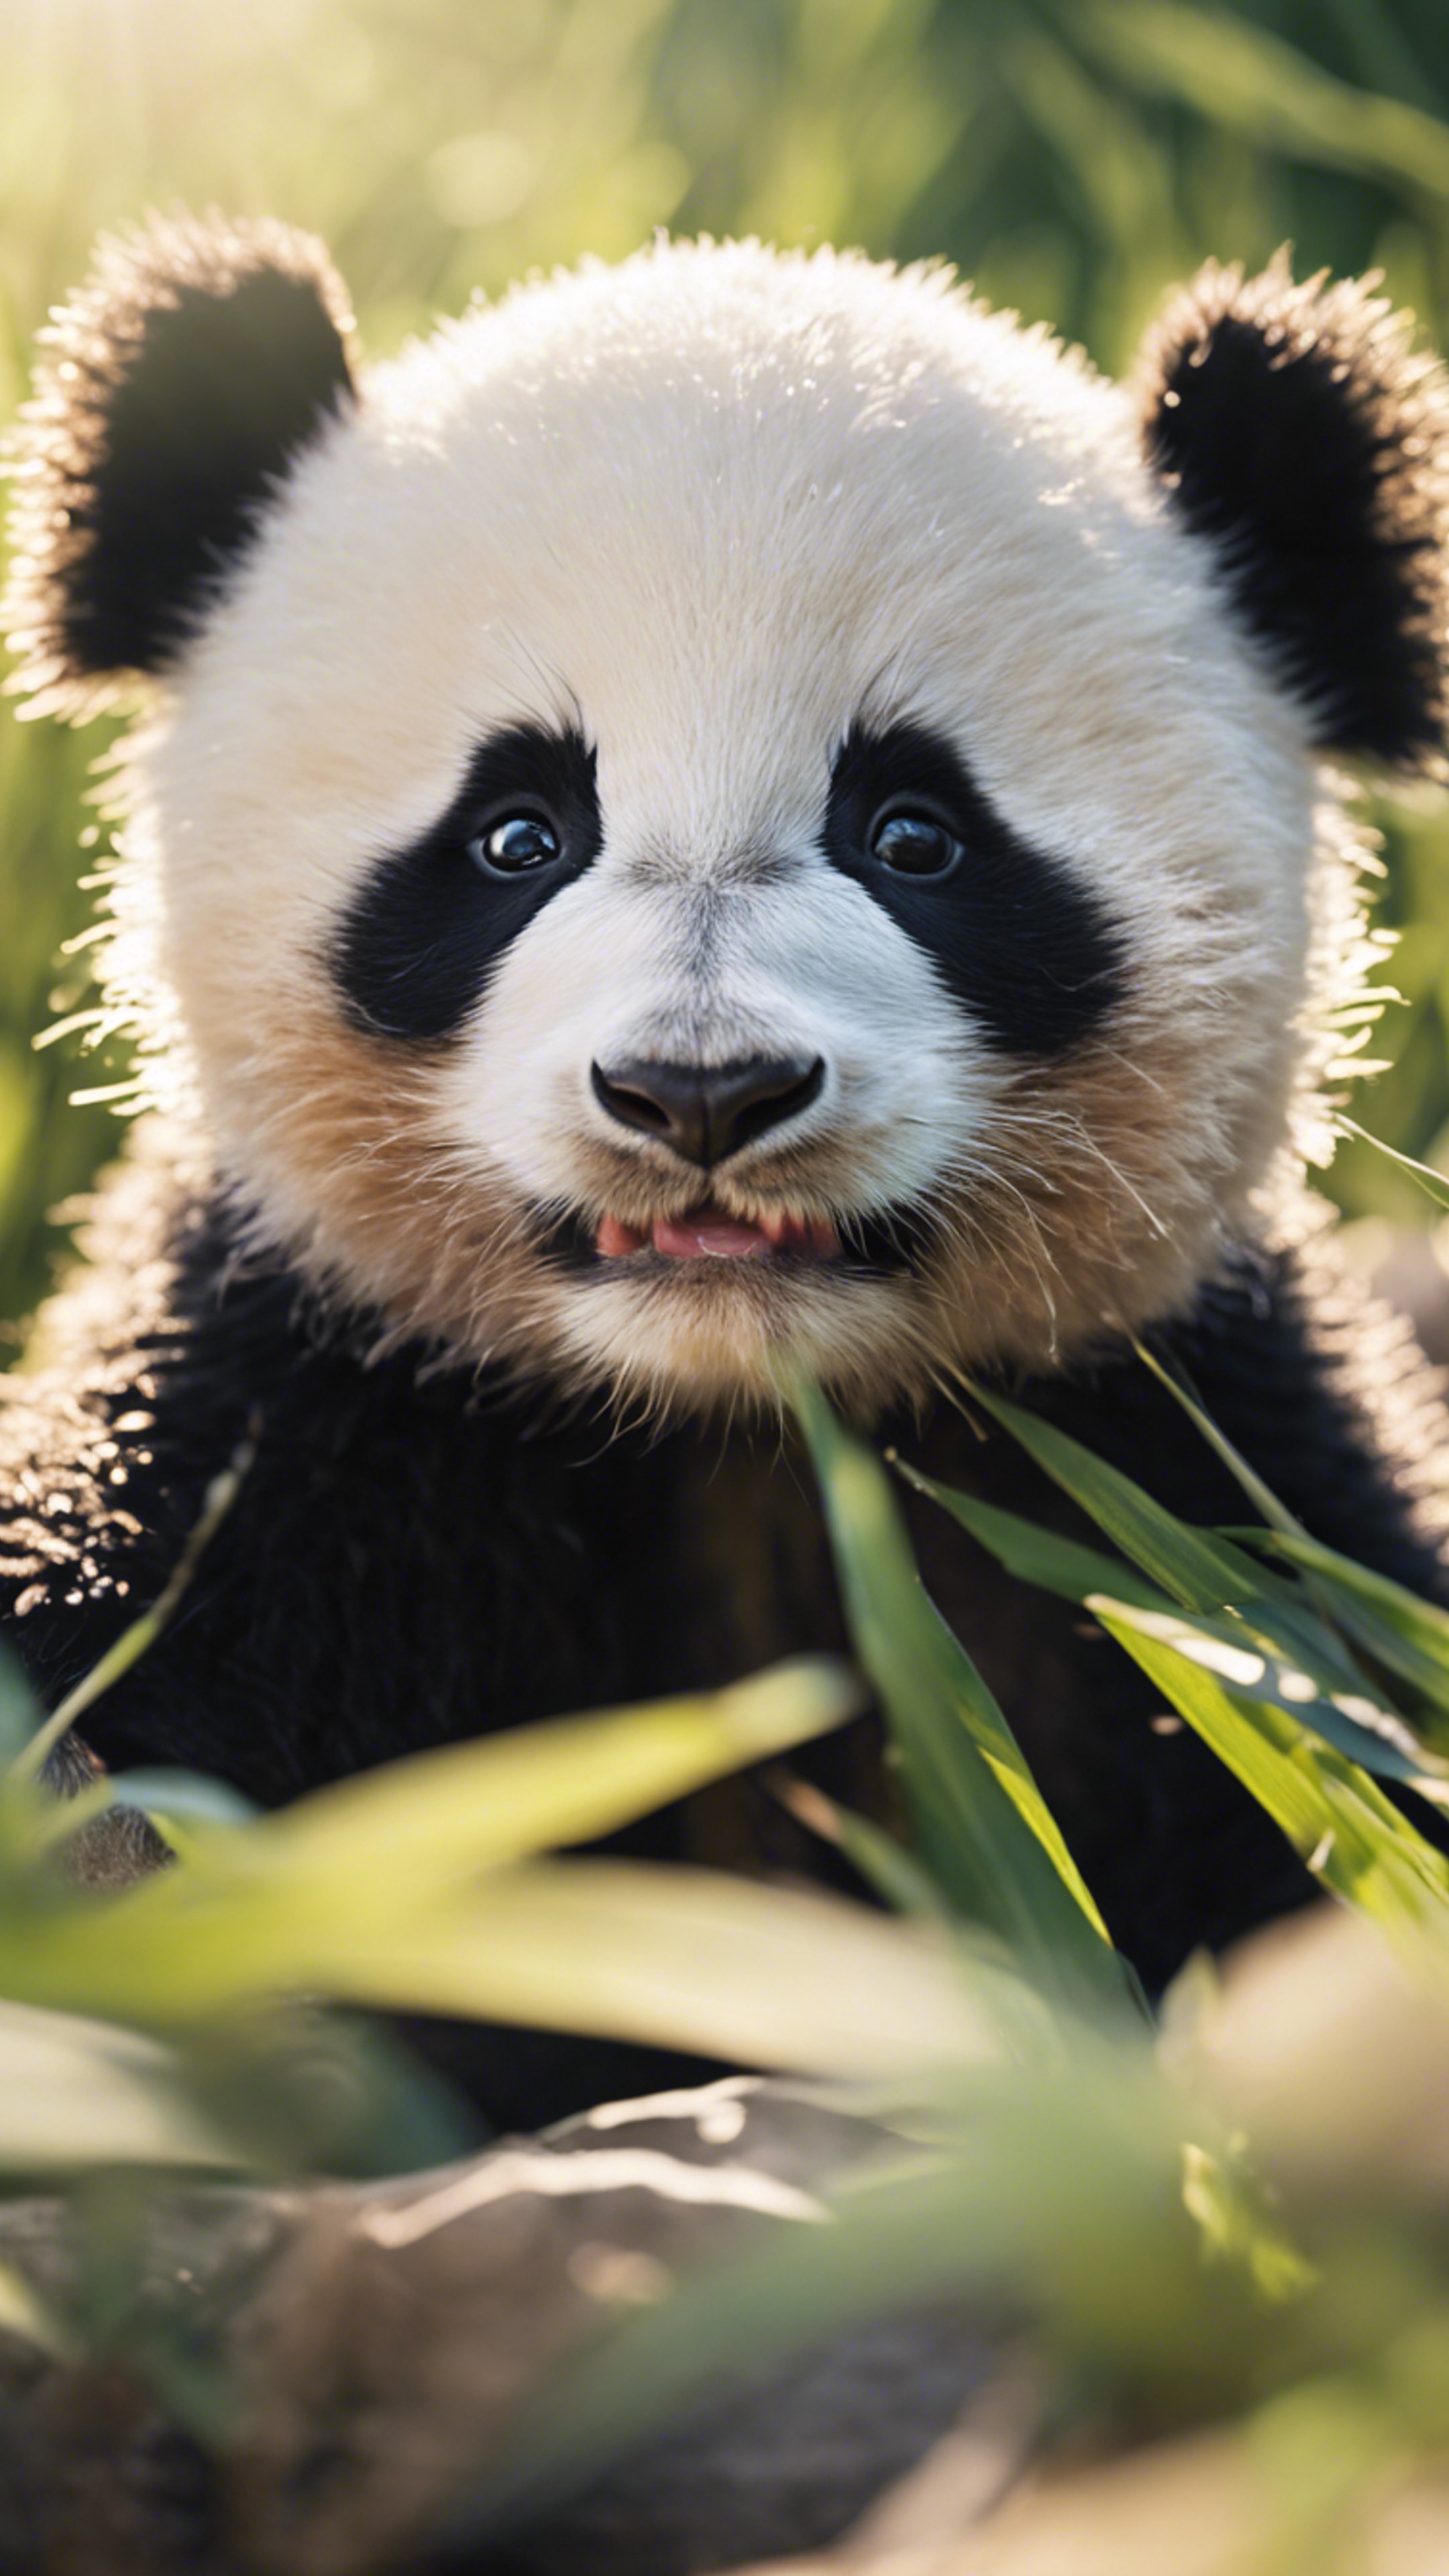 A cheeky panda cub pulling a funny face, under the warm and inviting summer sun. 牆紙[260c49d866ff4dc685e3]